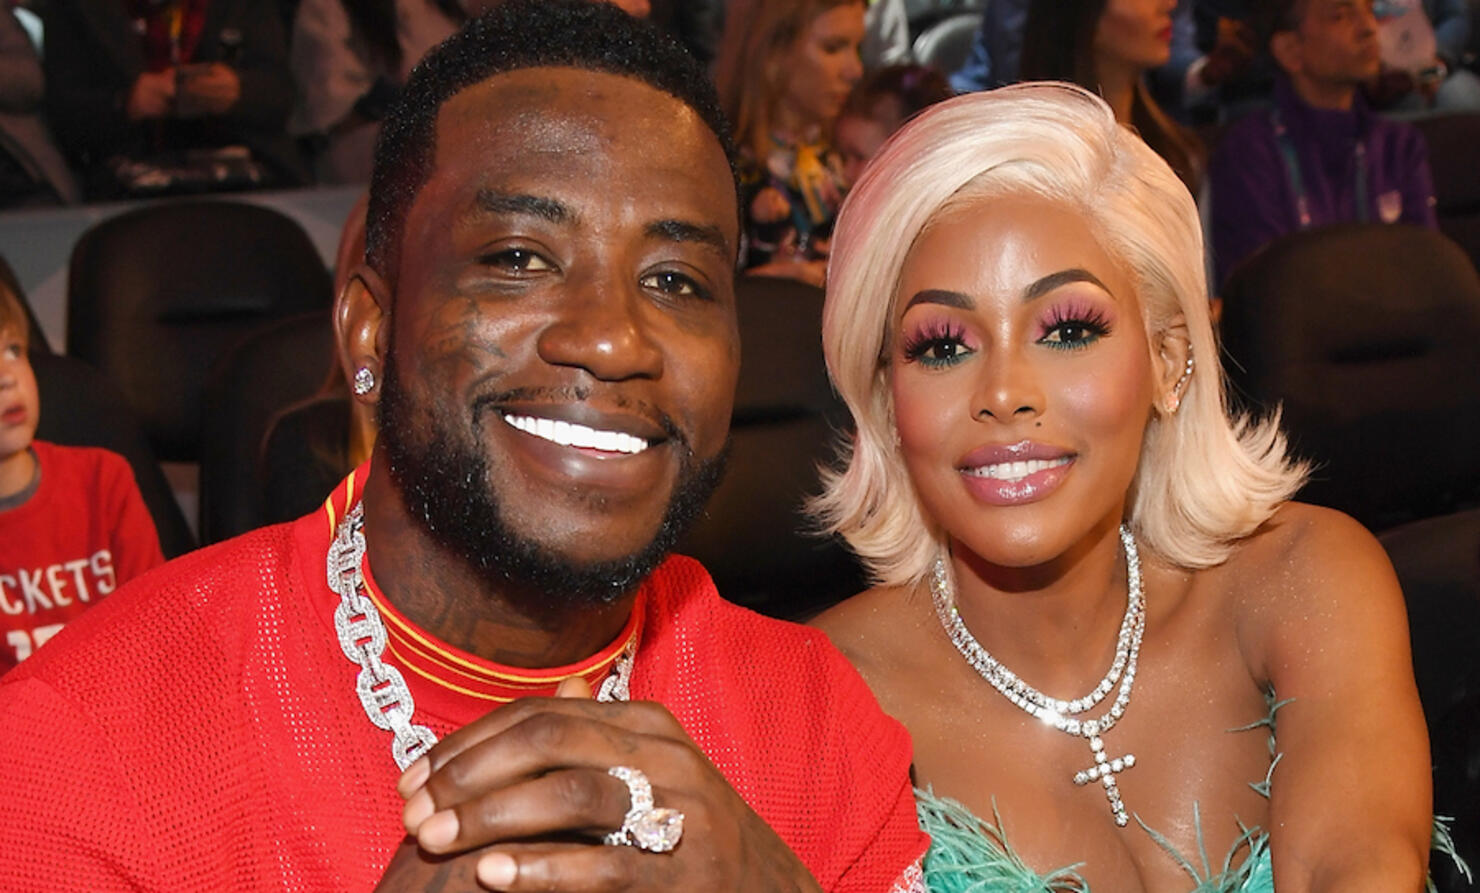 Gucci Mane and Wife Keyshia Ka'oir Welcome Second Baby and Reveal Her Name